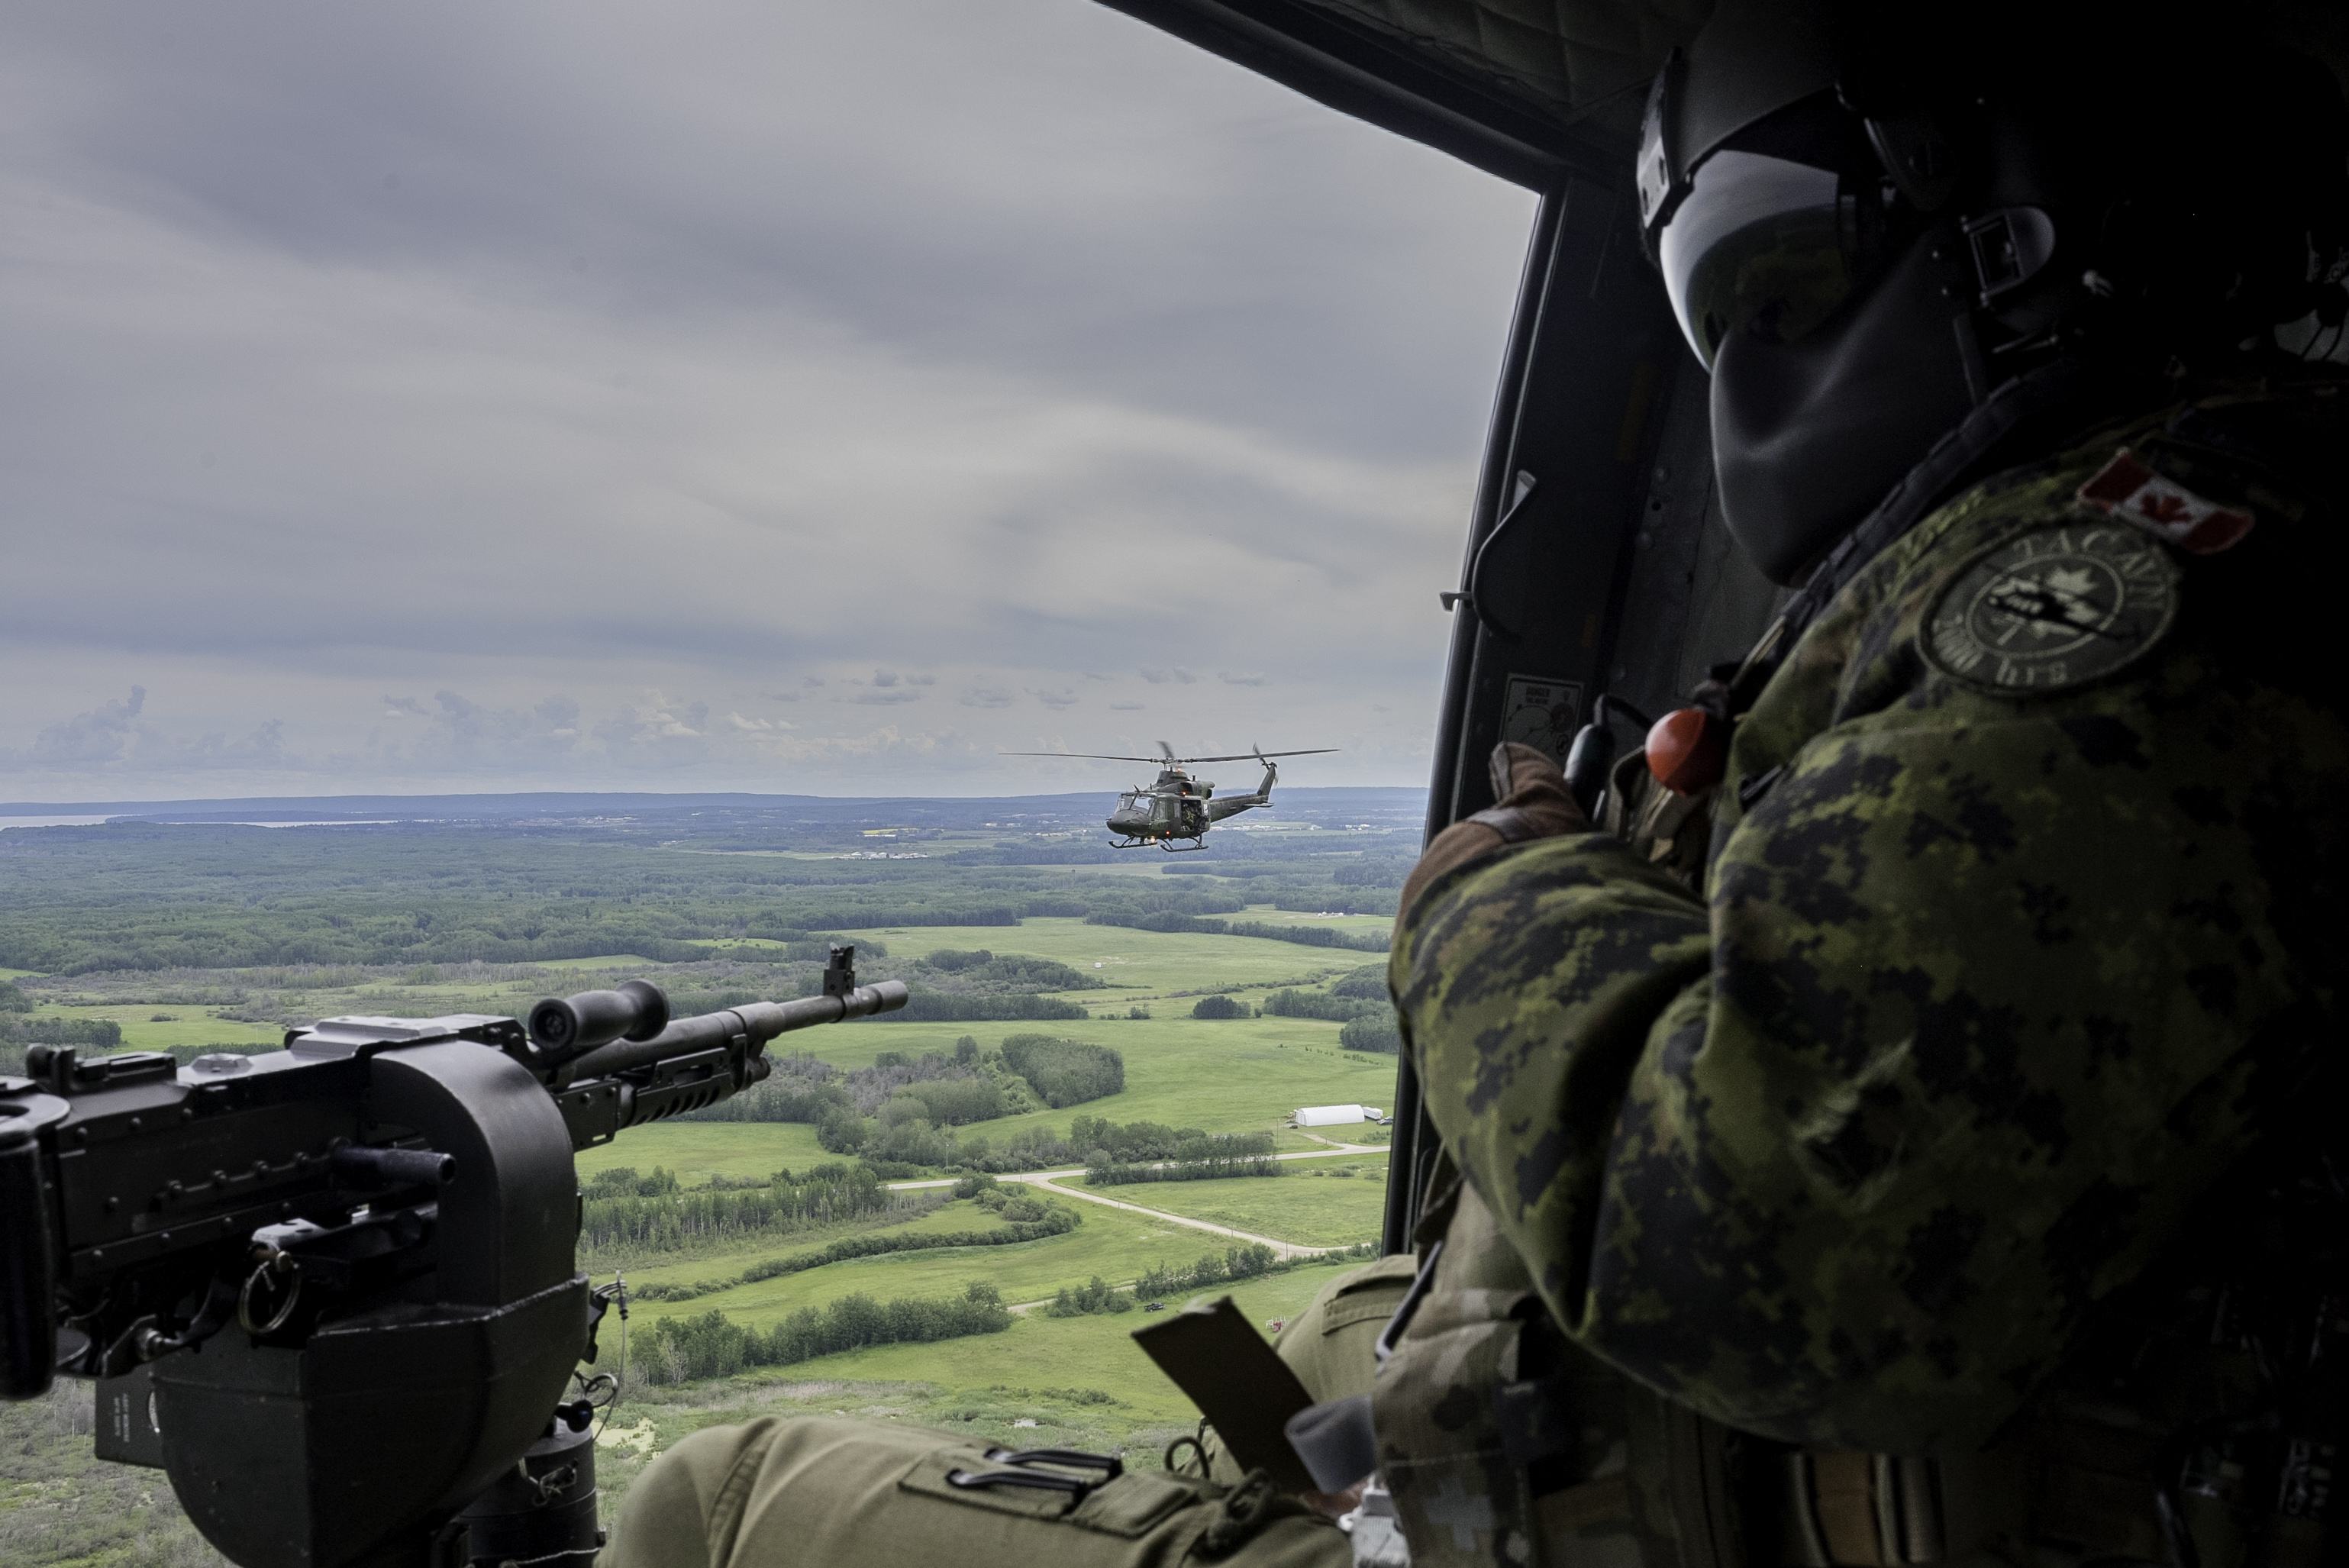 Royal Canadian Air Force CH-146 Griffons from 408 Tactical Helicopter Squadron participate in exercise Gander Gunner near 4 Wing Cold Lake, Alberta, on July 21, 2020. PHOTO: Private Connie Valin